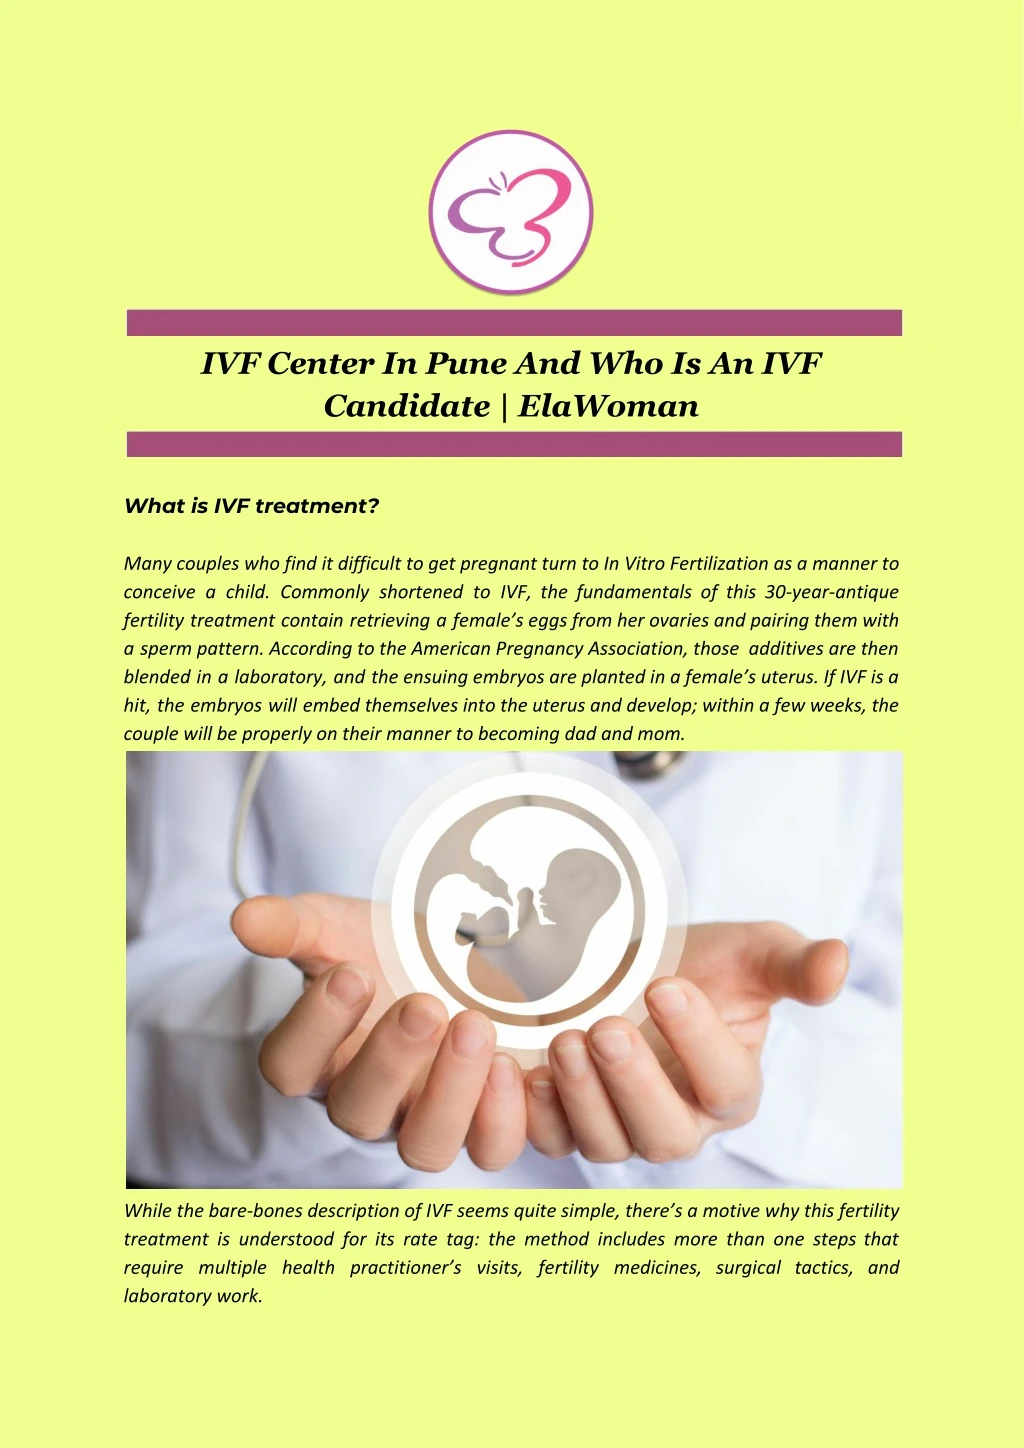 ivf center in pune and who is an ivf candidate